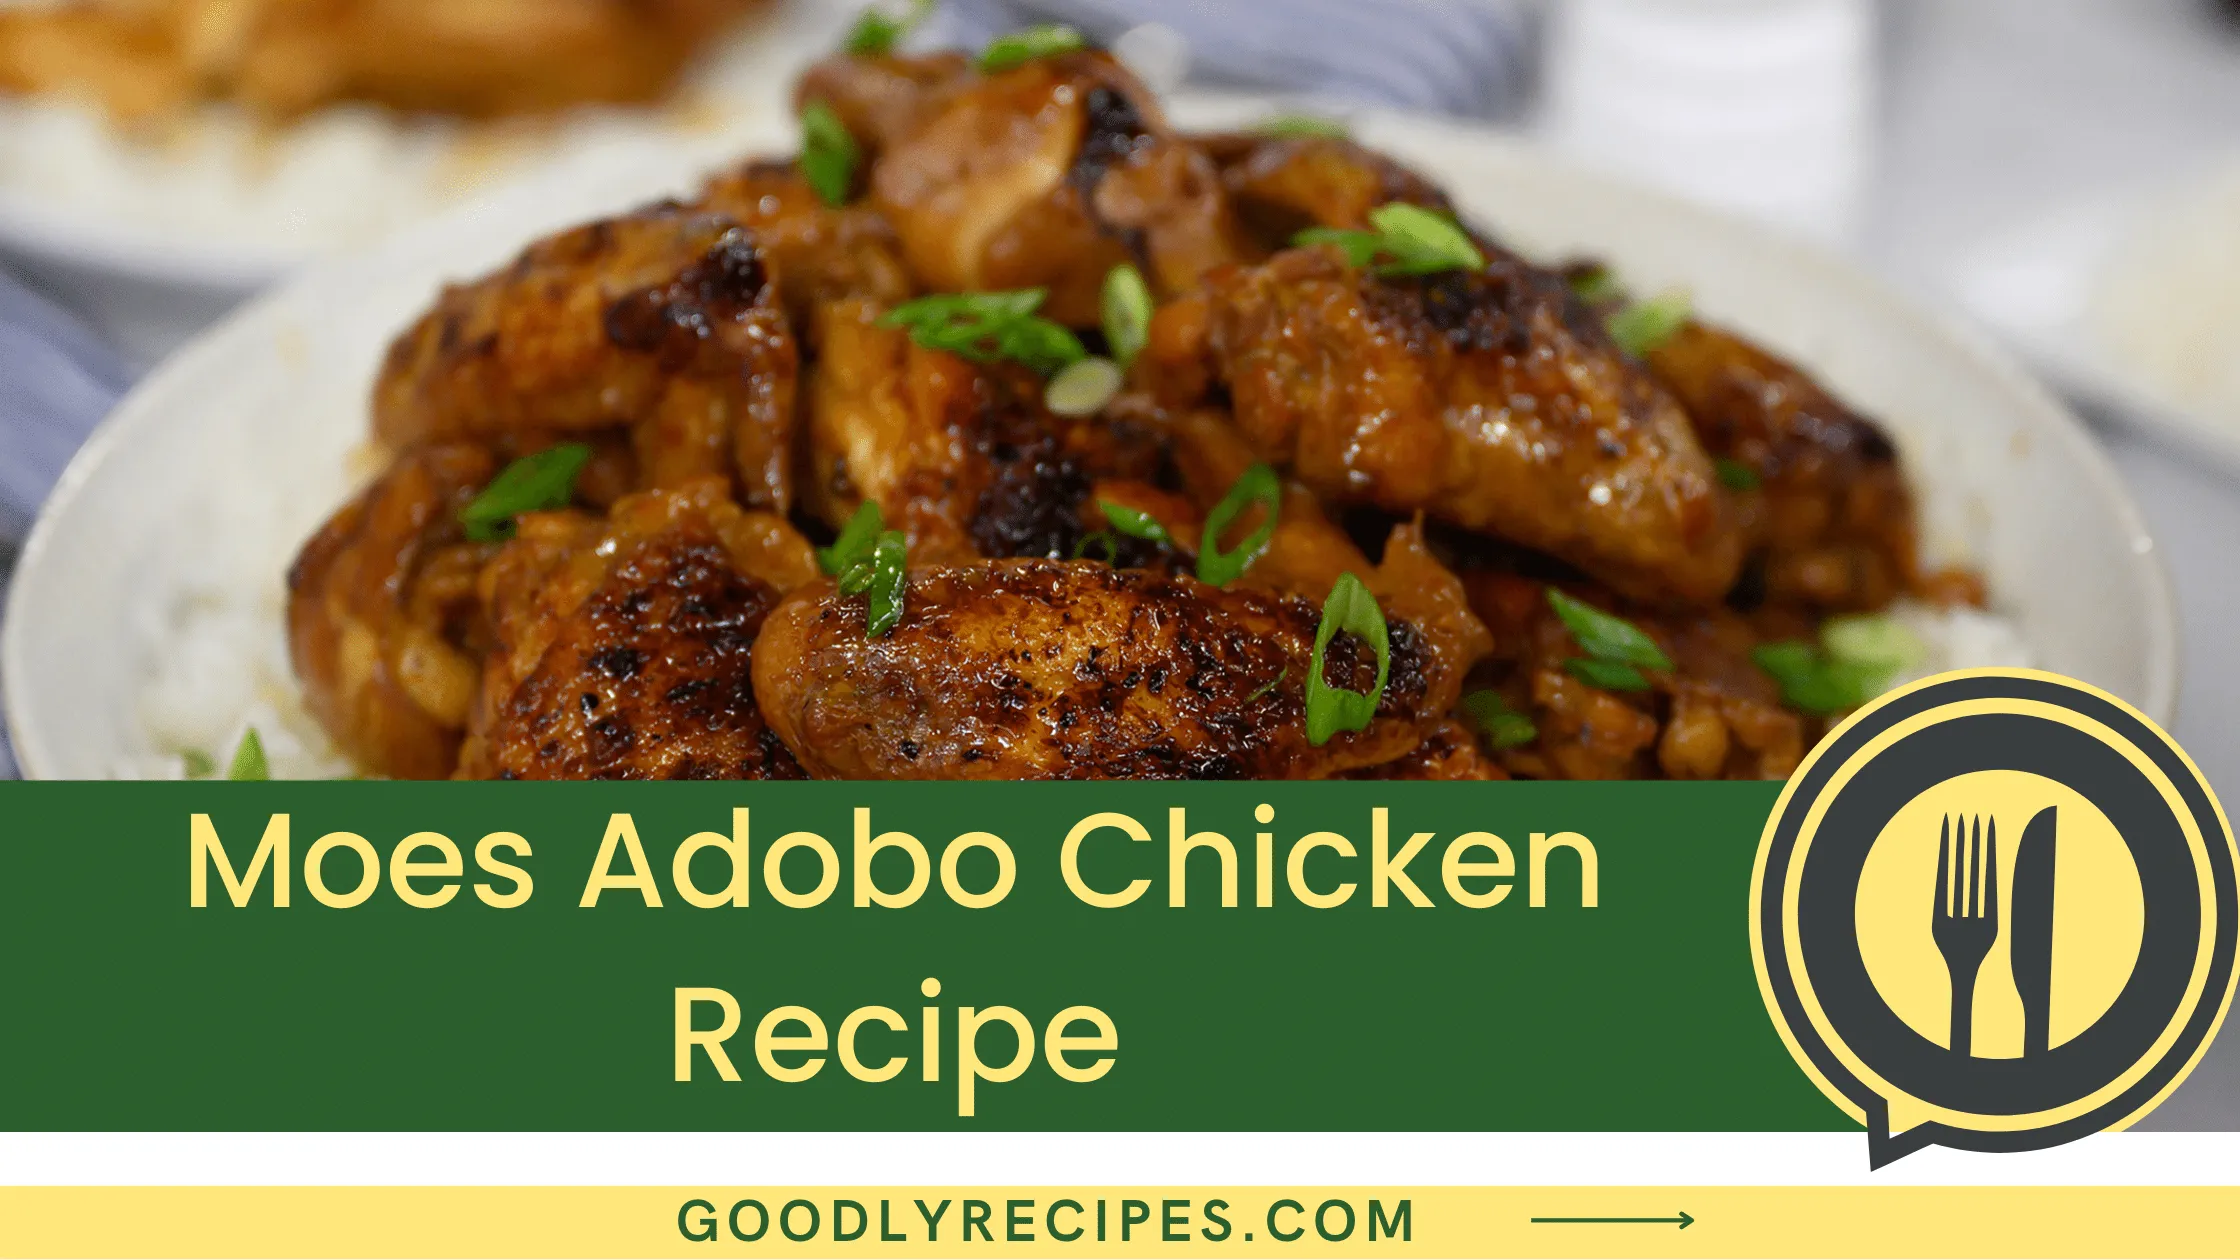 What is Moe’s Adobo Chicken?